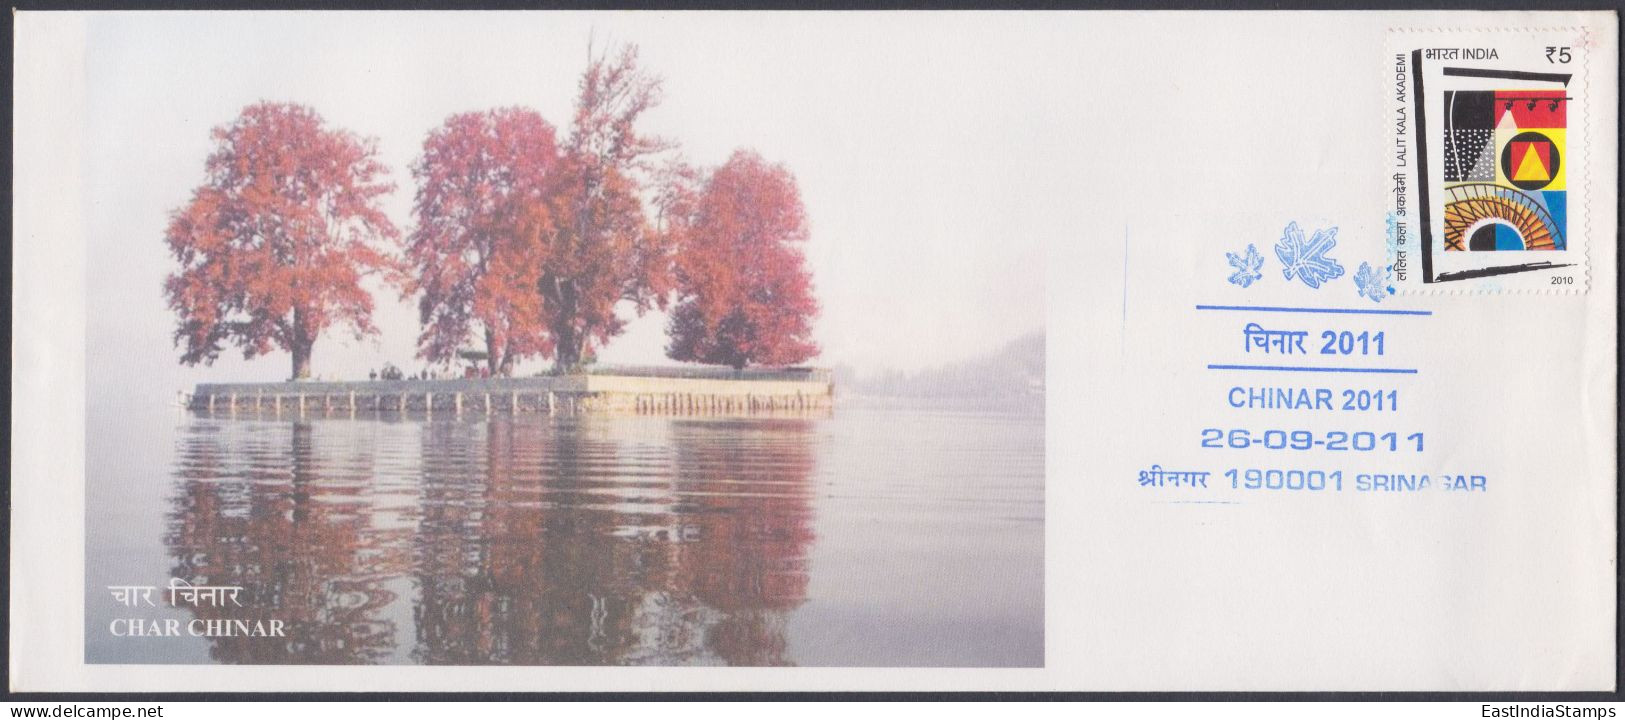 Inde India 2011 Special Cover Char Chinar, Dal Lake, Island, Tree, Trees, Tourism, Srinagar, Kashmir, Pictorial Postmark - Covers & Documents